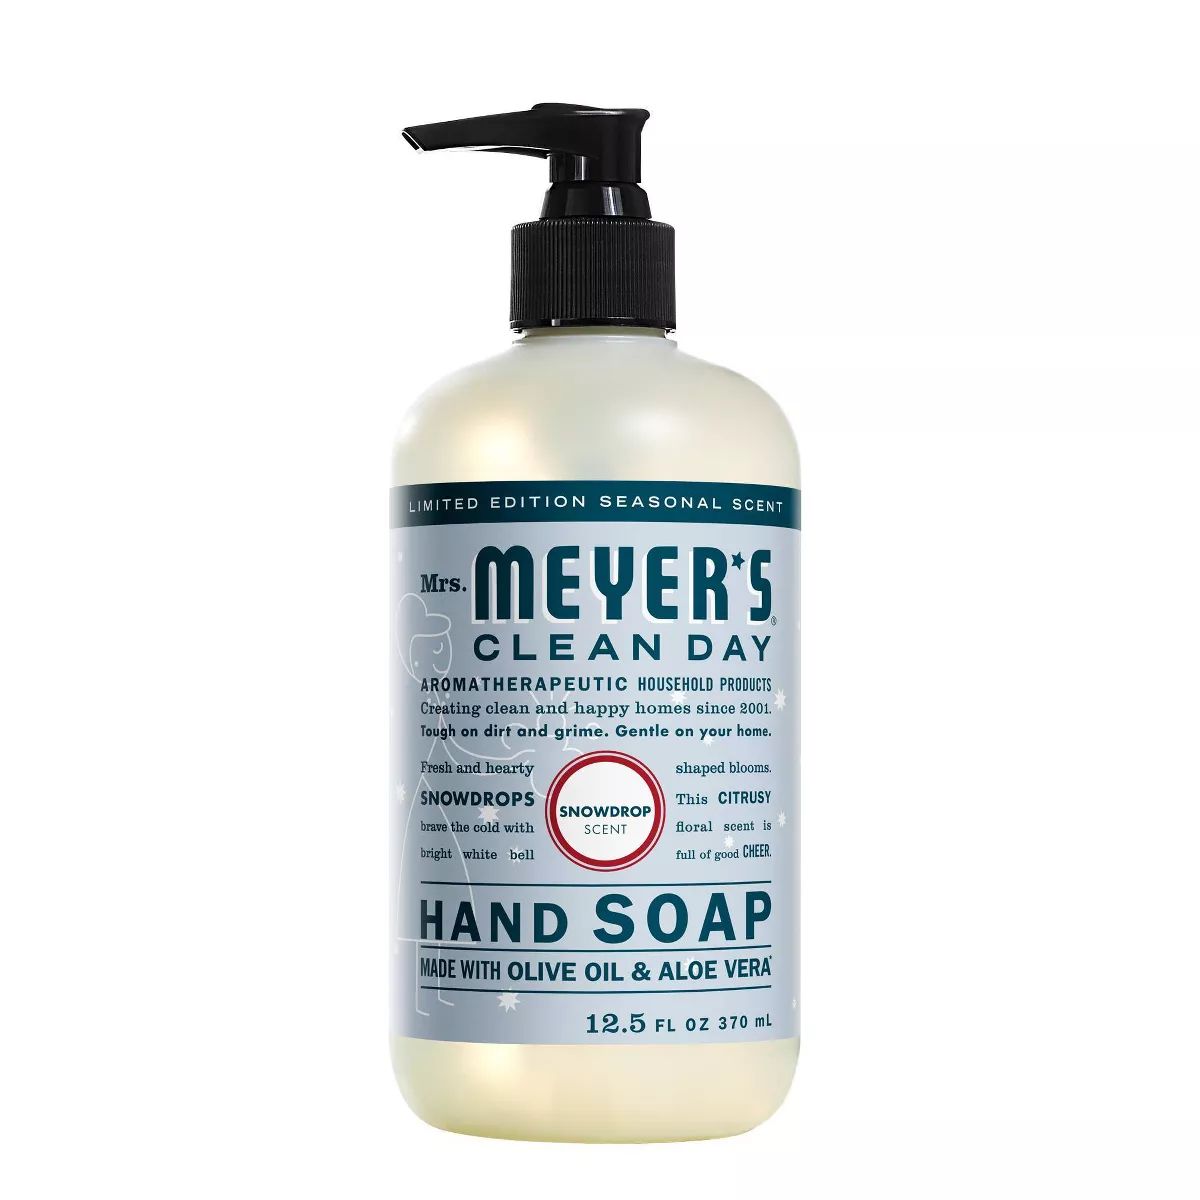 Mrs. Meyer's Clean Day Holiday Hand Soap - Snowdrop - 12.5 fl oz | Target